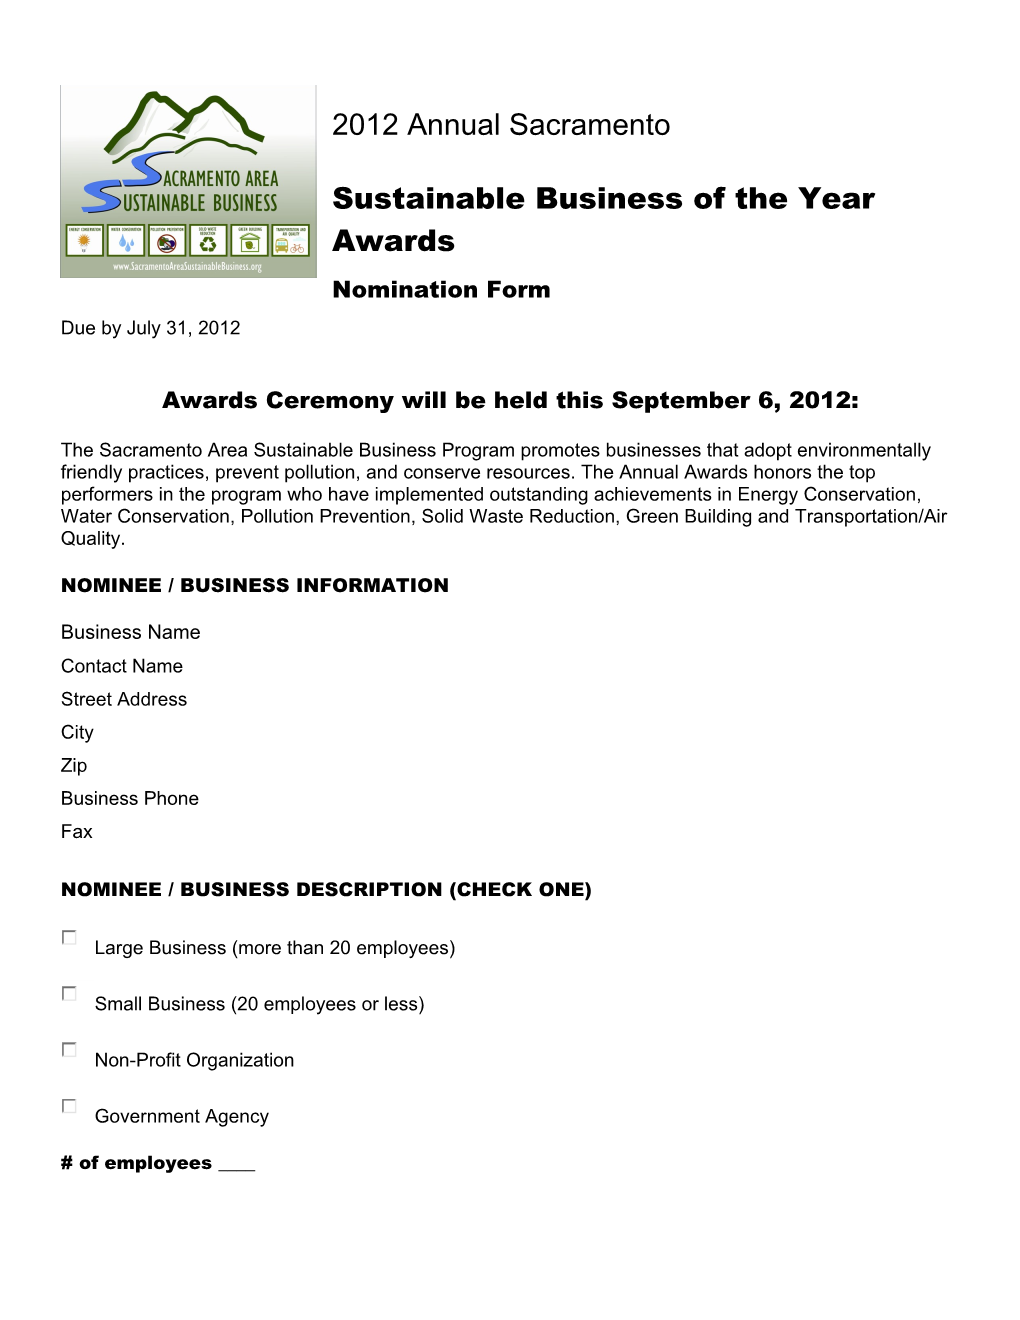 Sustainable Business of the Year Awards